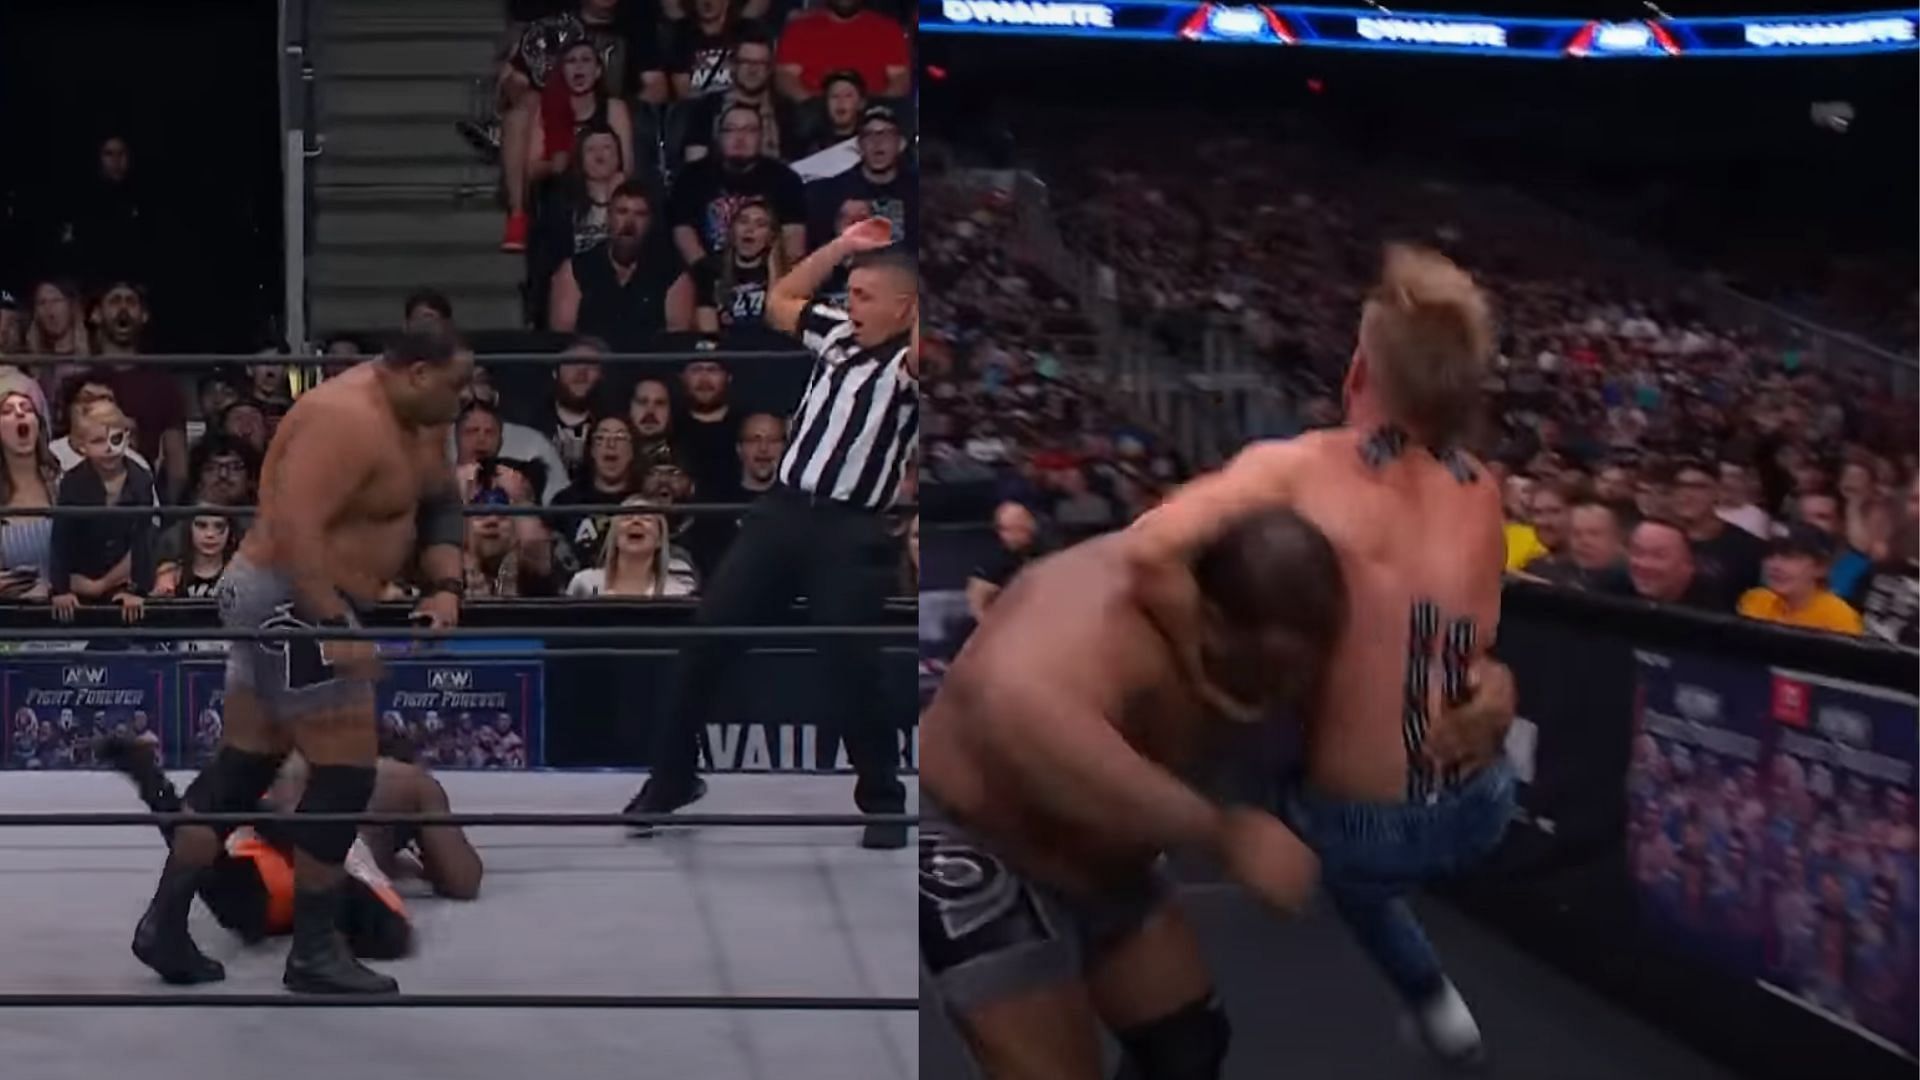 Keith Lee at the center of controversy as ref botches finish of AEW Dynamite match